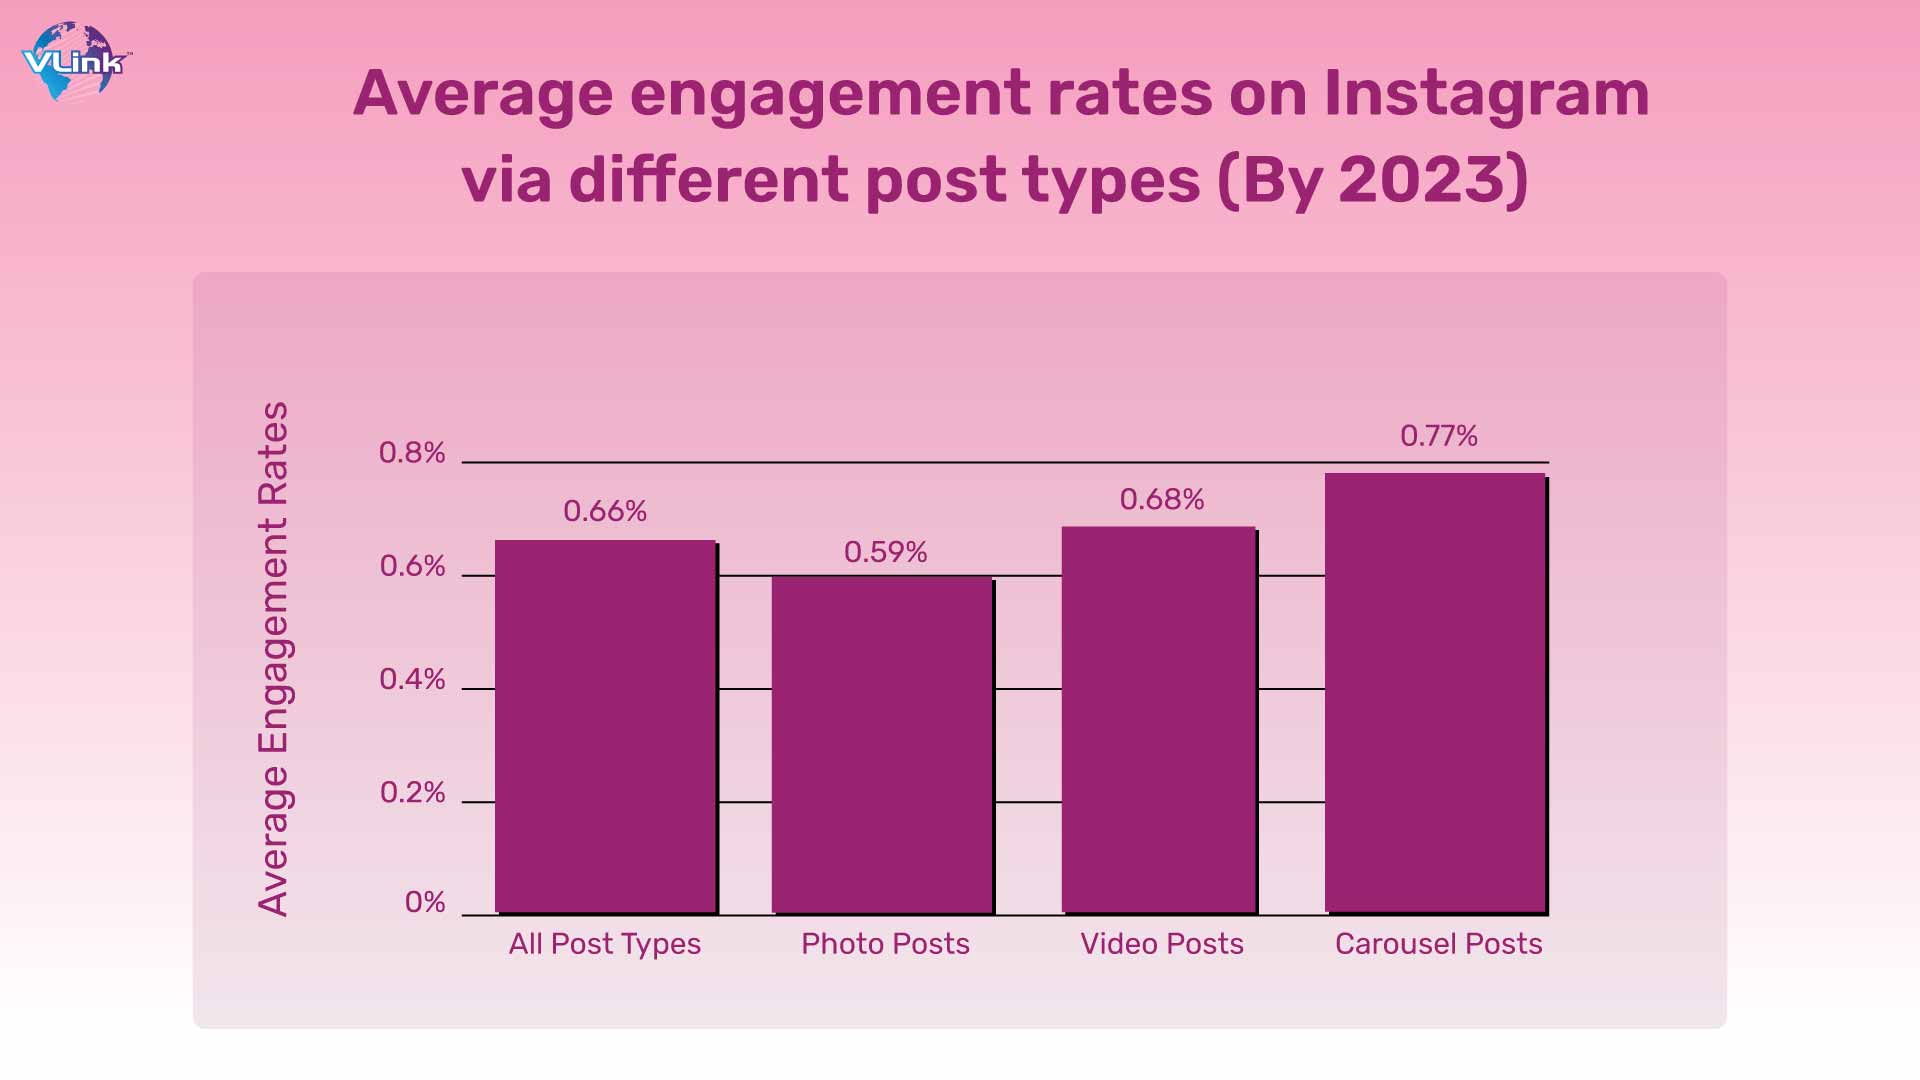 Average engagement rates on Instagram via different post types (By 2023)